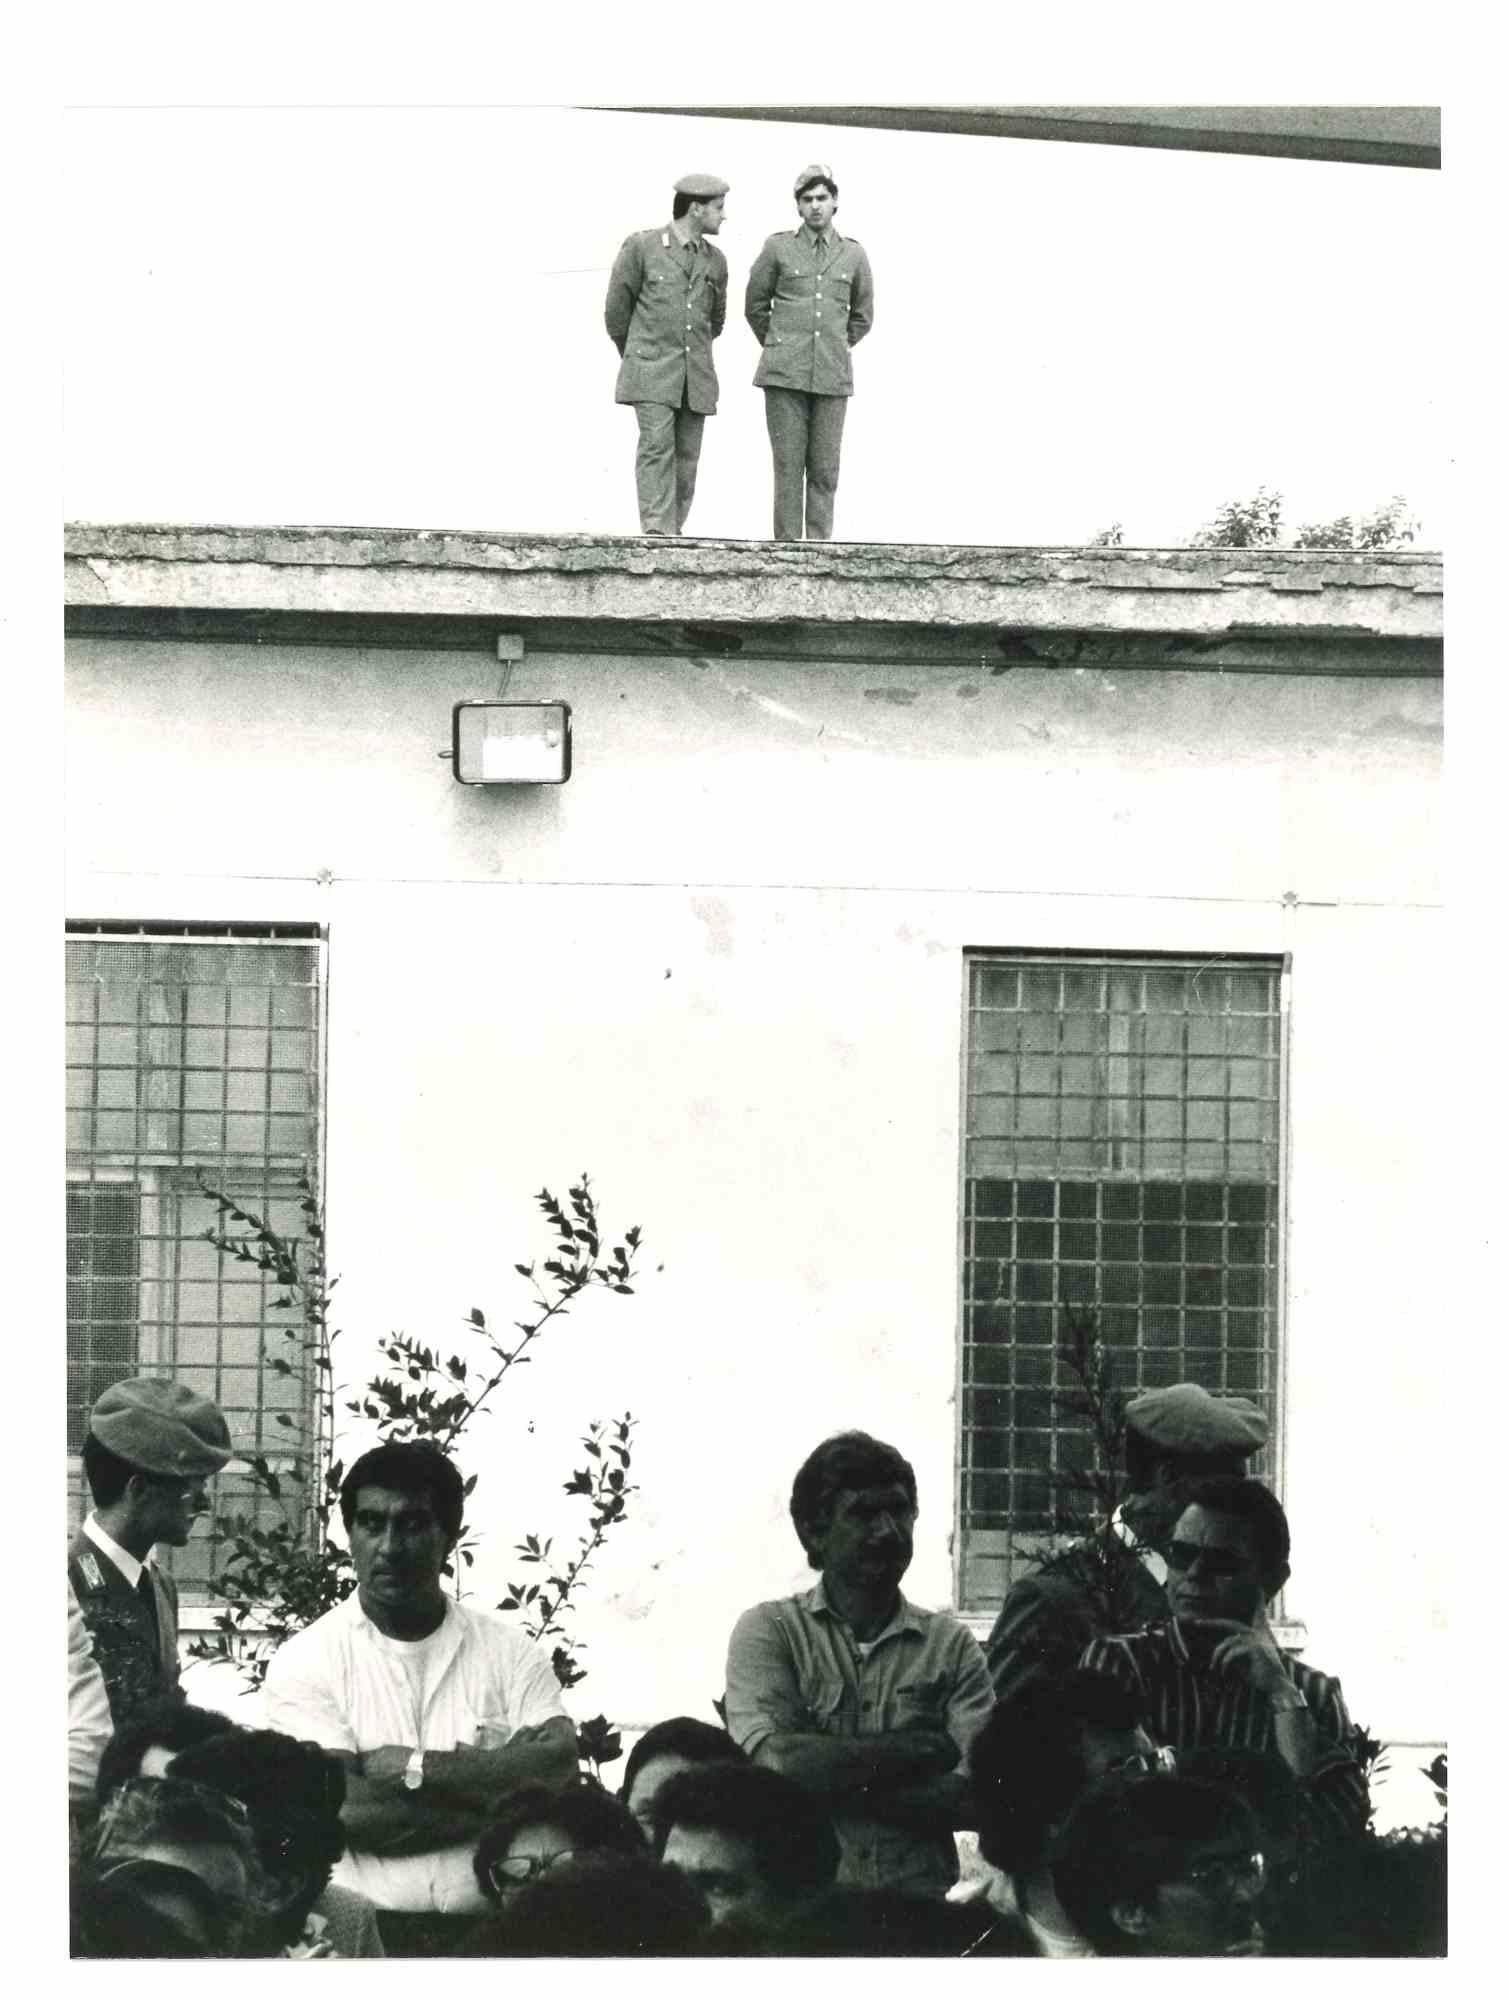 Historical Photo of Prison - 1970s